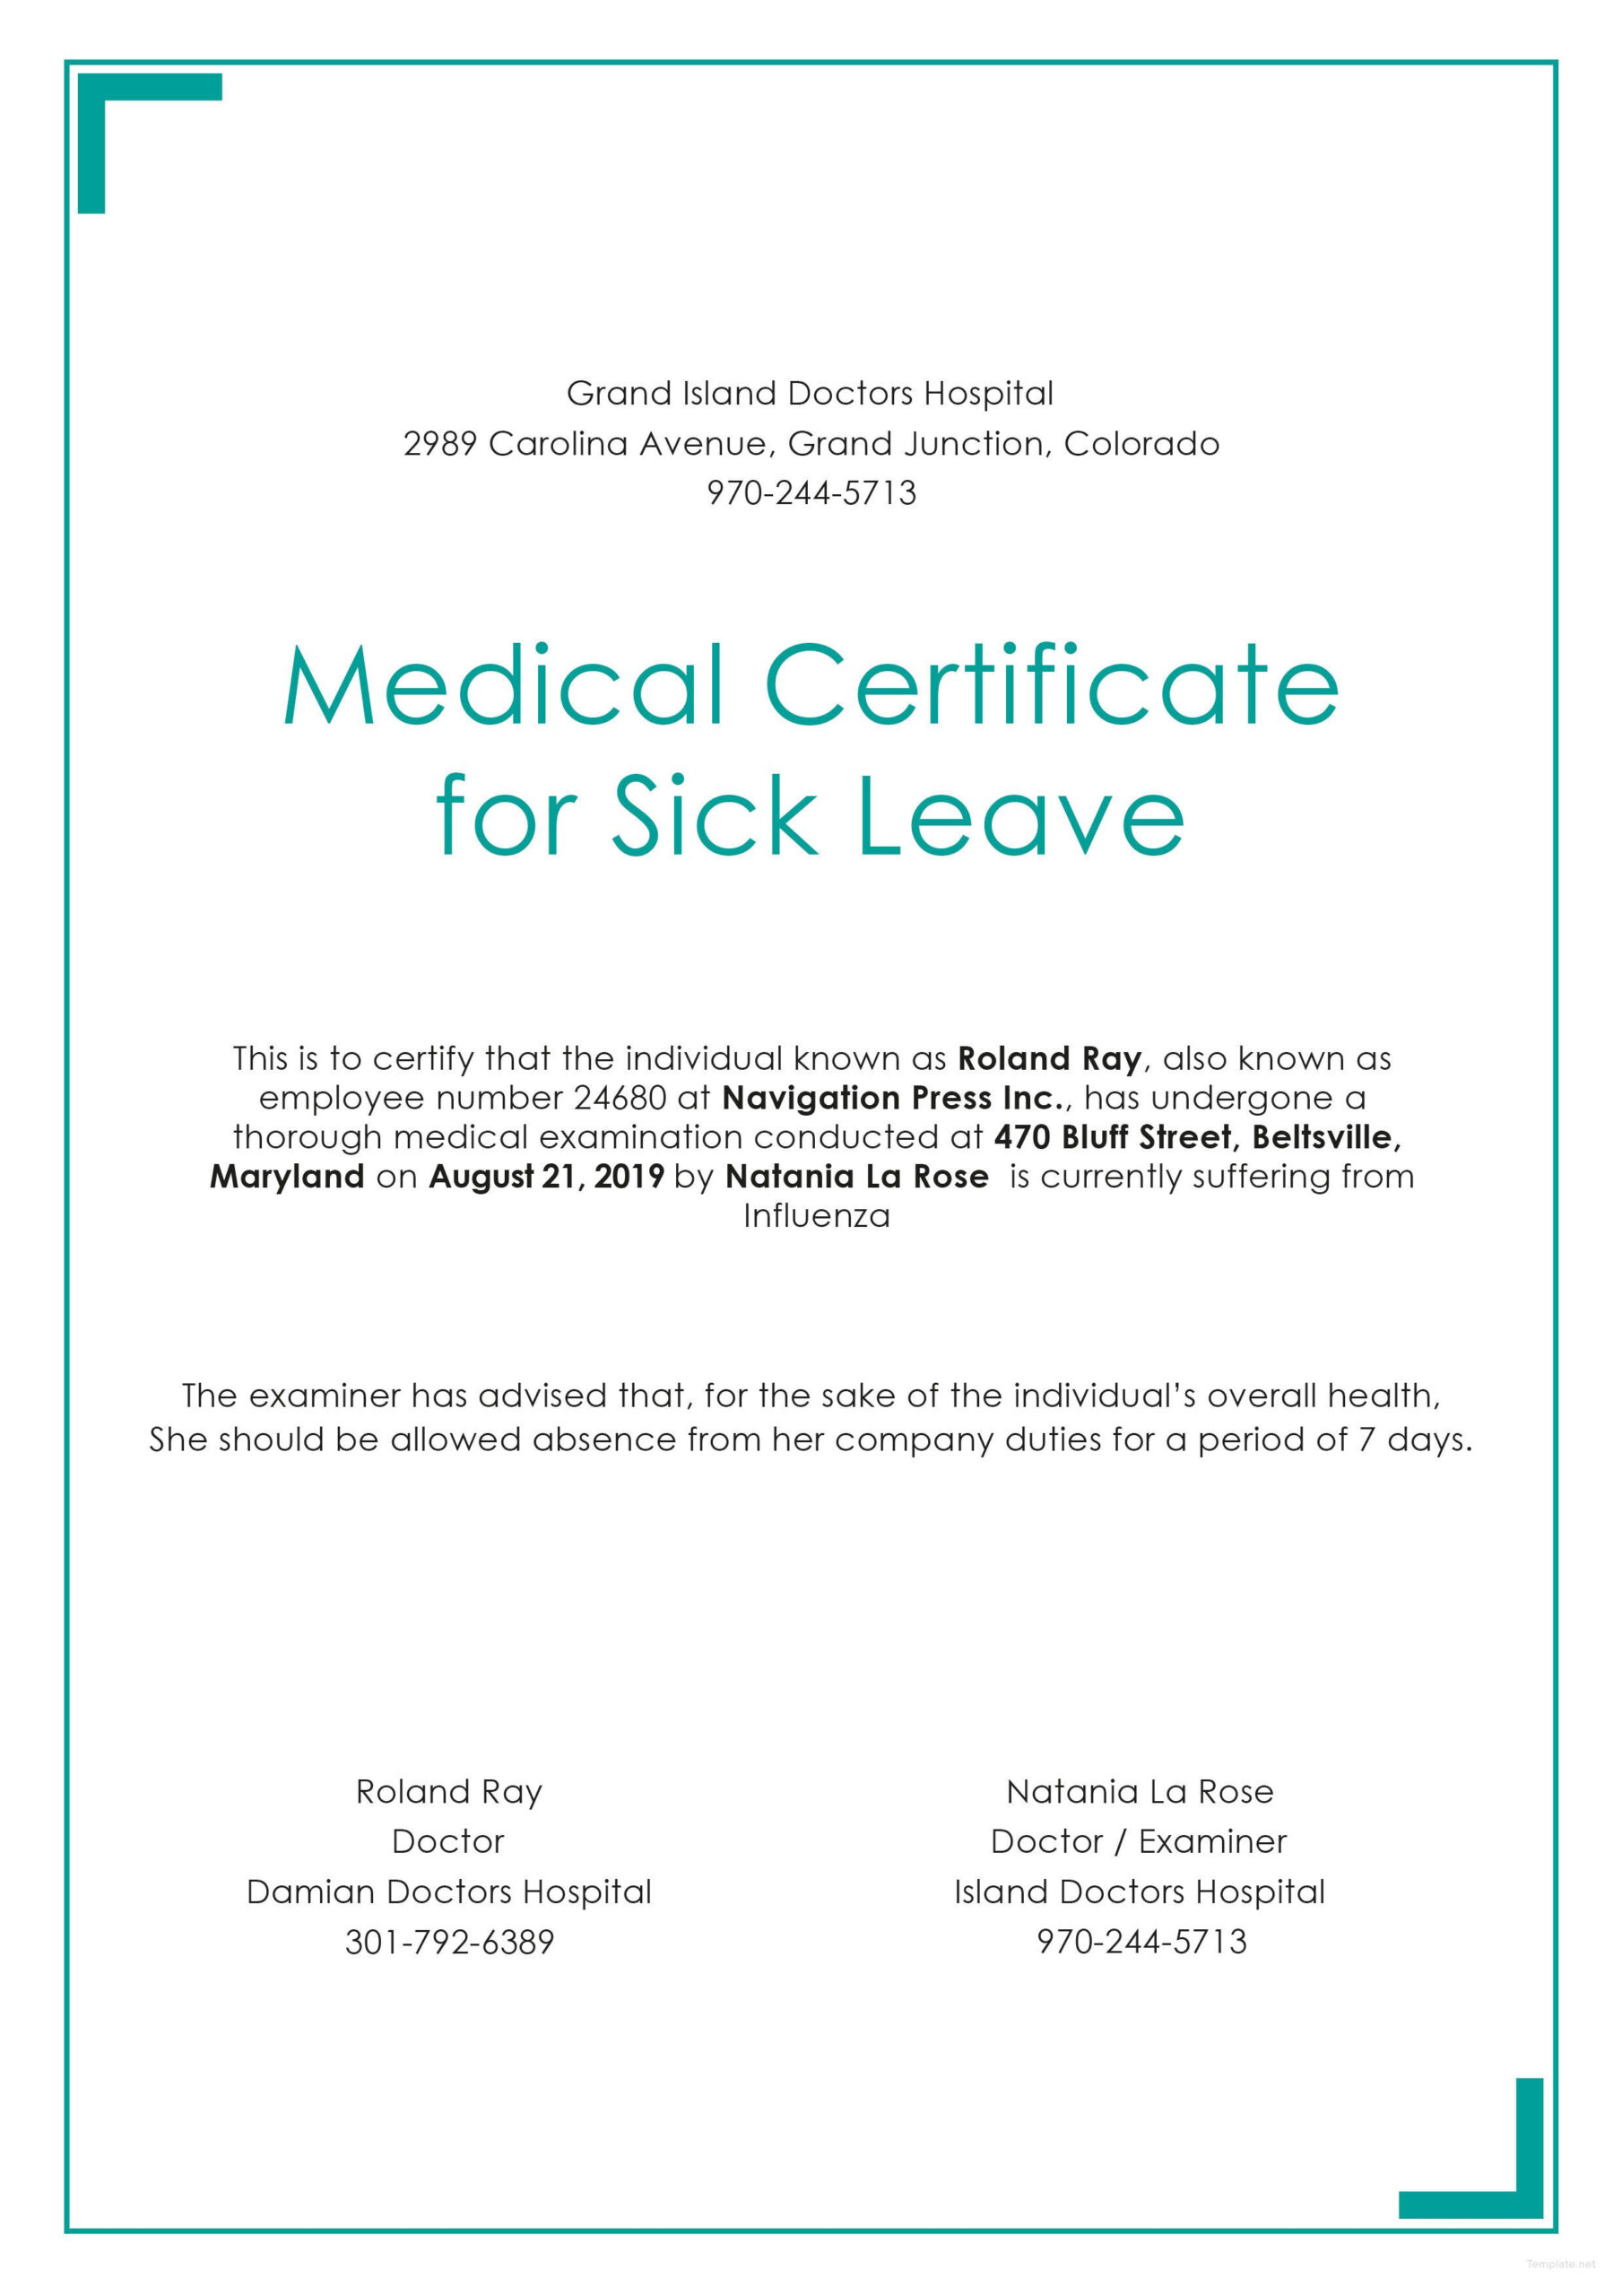 Free Medical Certificate For Sick Leave | Medical With Australian Doctors Certificate Template